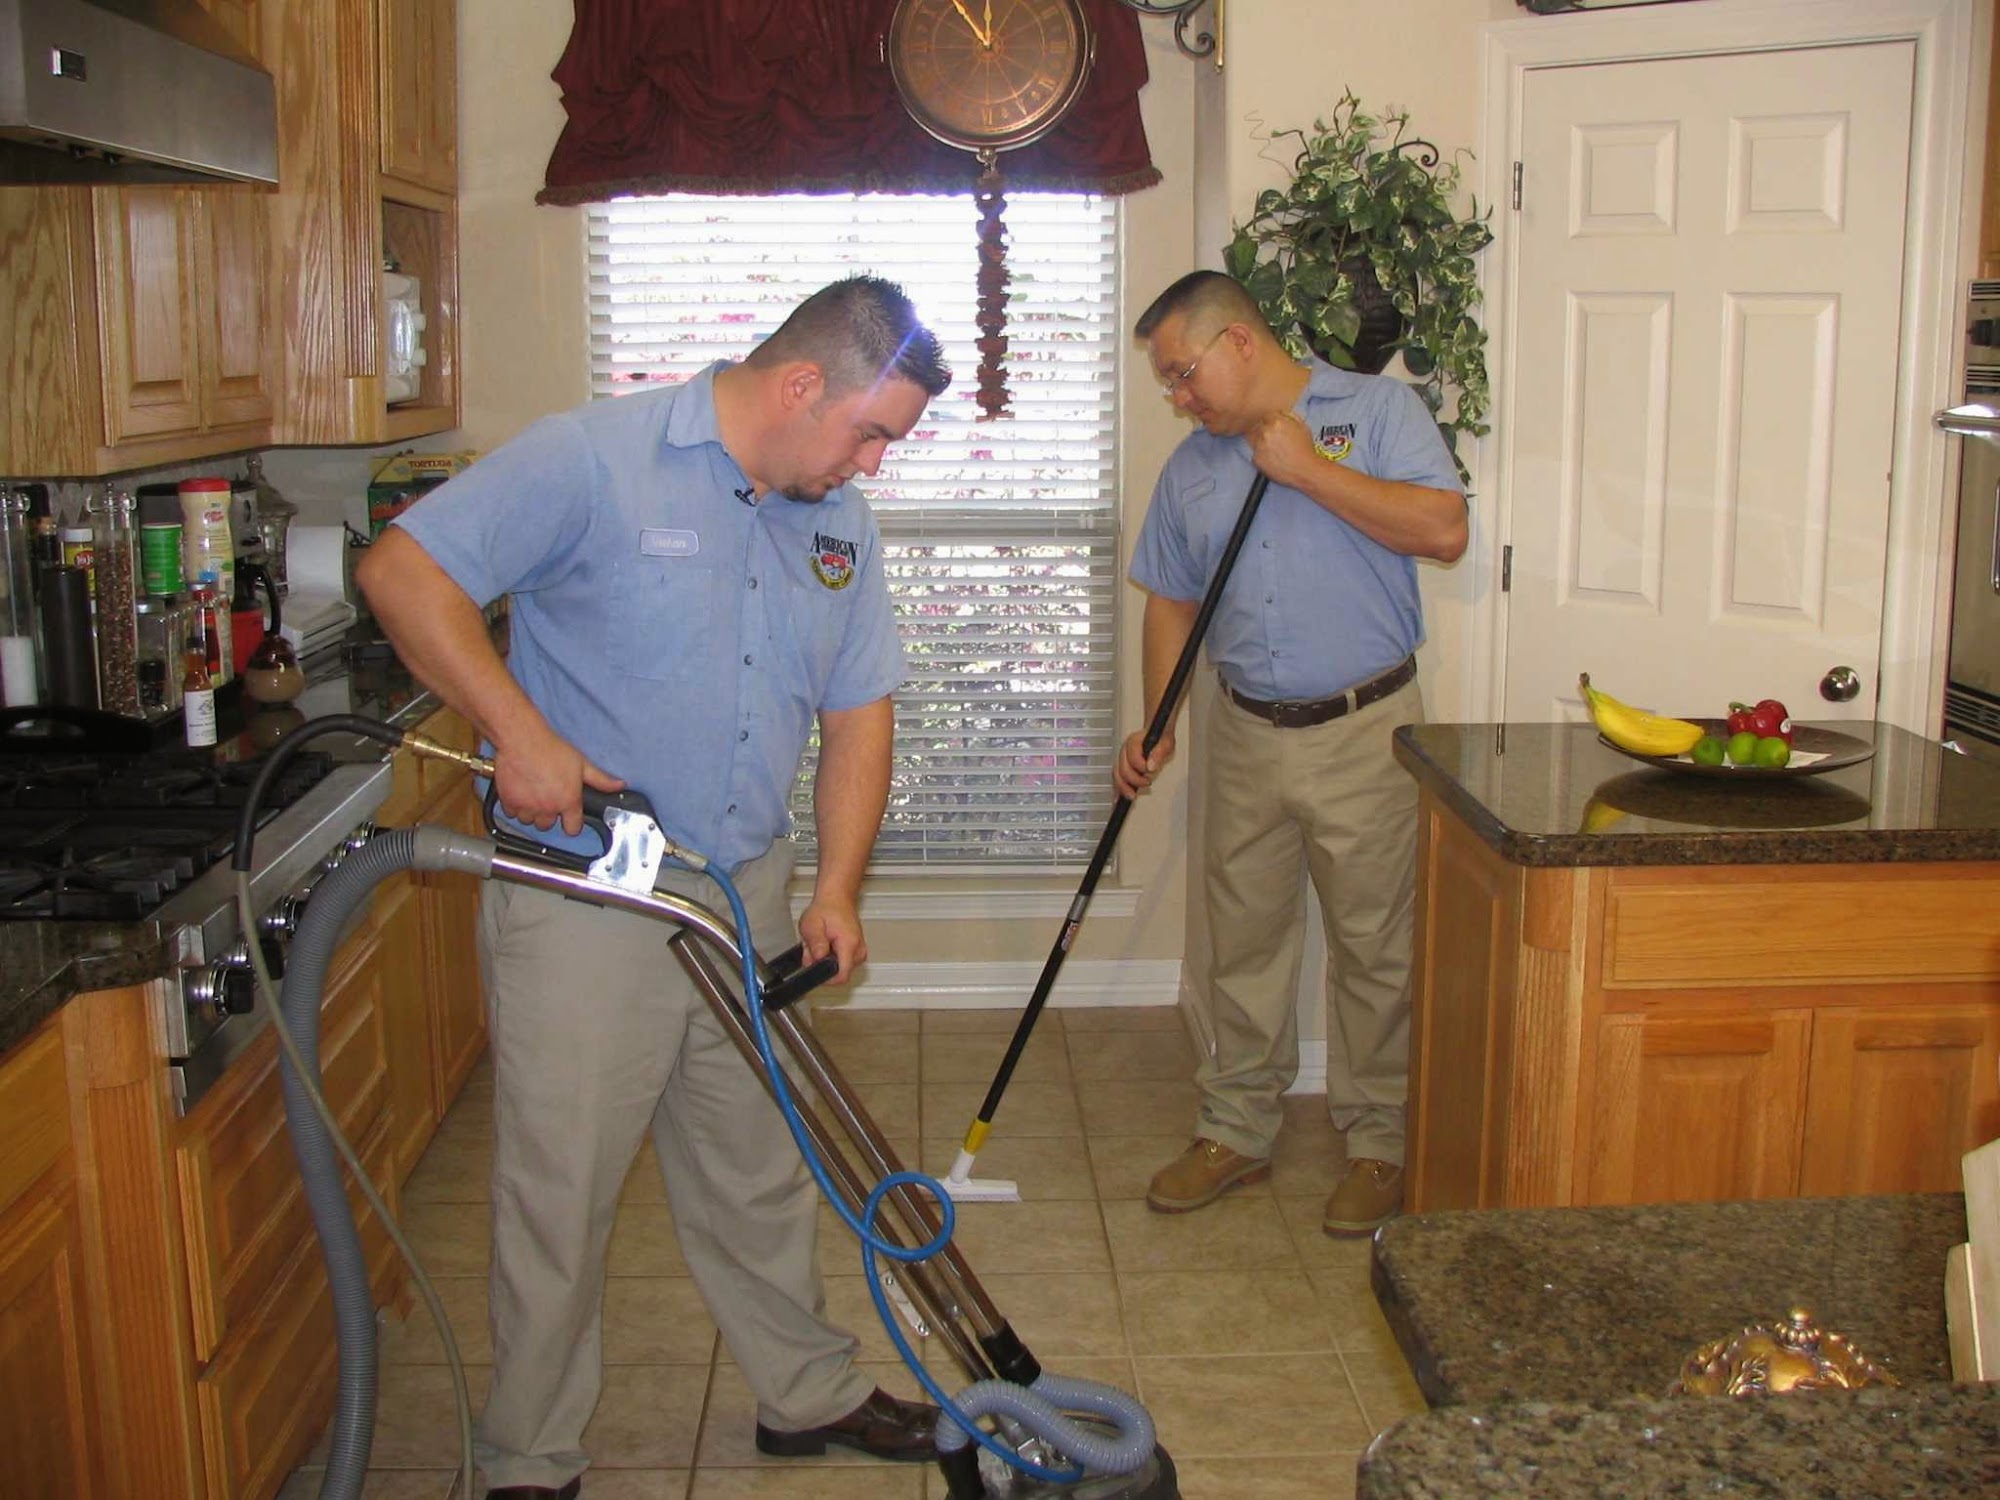 American Steam-A-Way Professional Carpet Cleaning 3161 Nall St, Port Neches Texas 77651